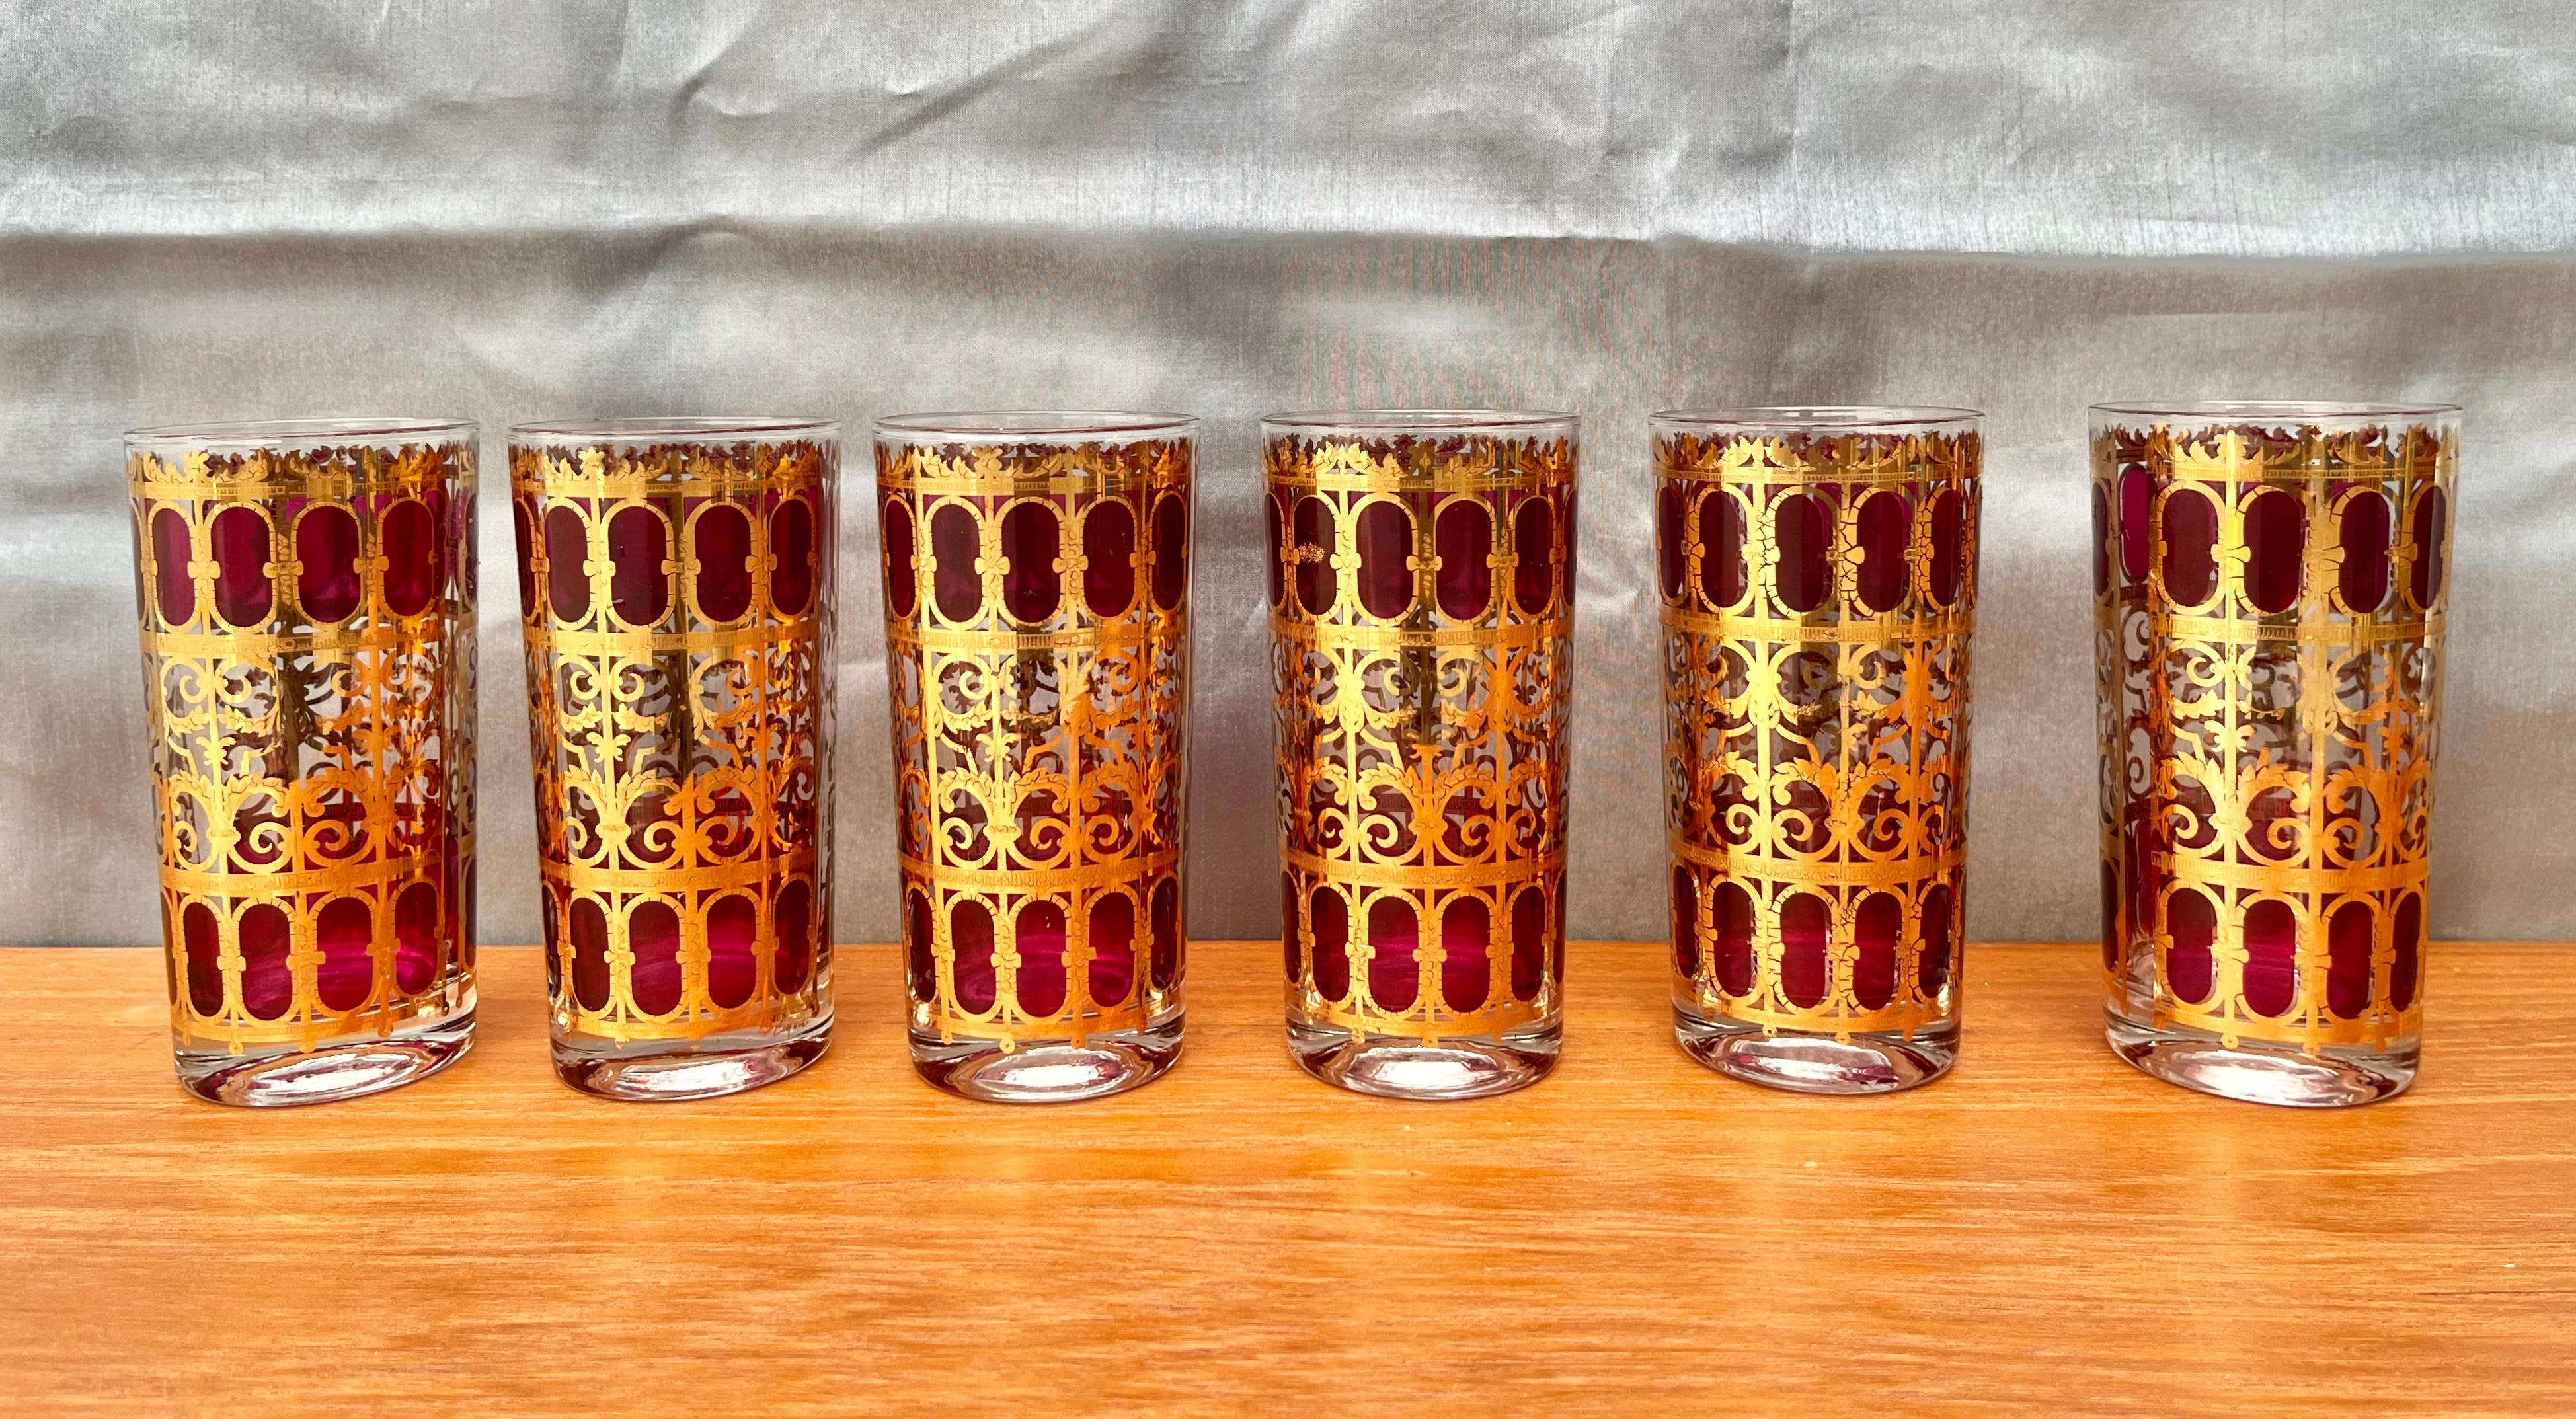 A set of 6 Mid-Century Modern culver highball glasses in the Hollywood Regency Cranberry scroll pattern. Circa 1960s .
Feature an intricate 22-karat gold filigree scroll work in a Moorish inspired windows pattern with cranberry red ovals filling